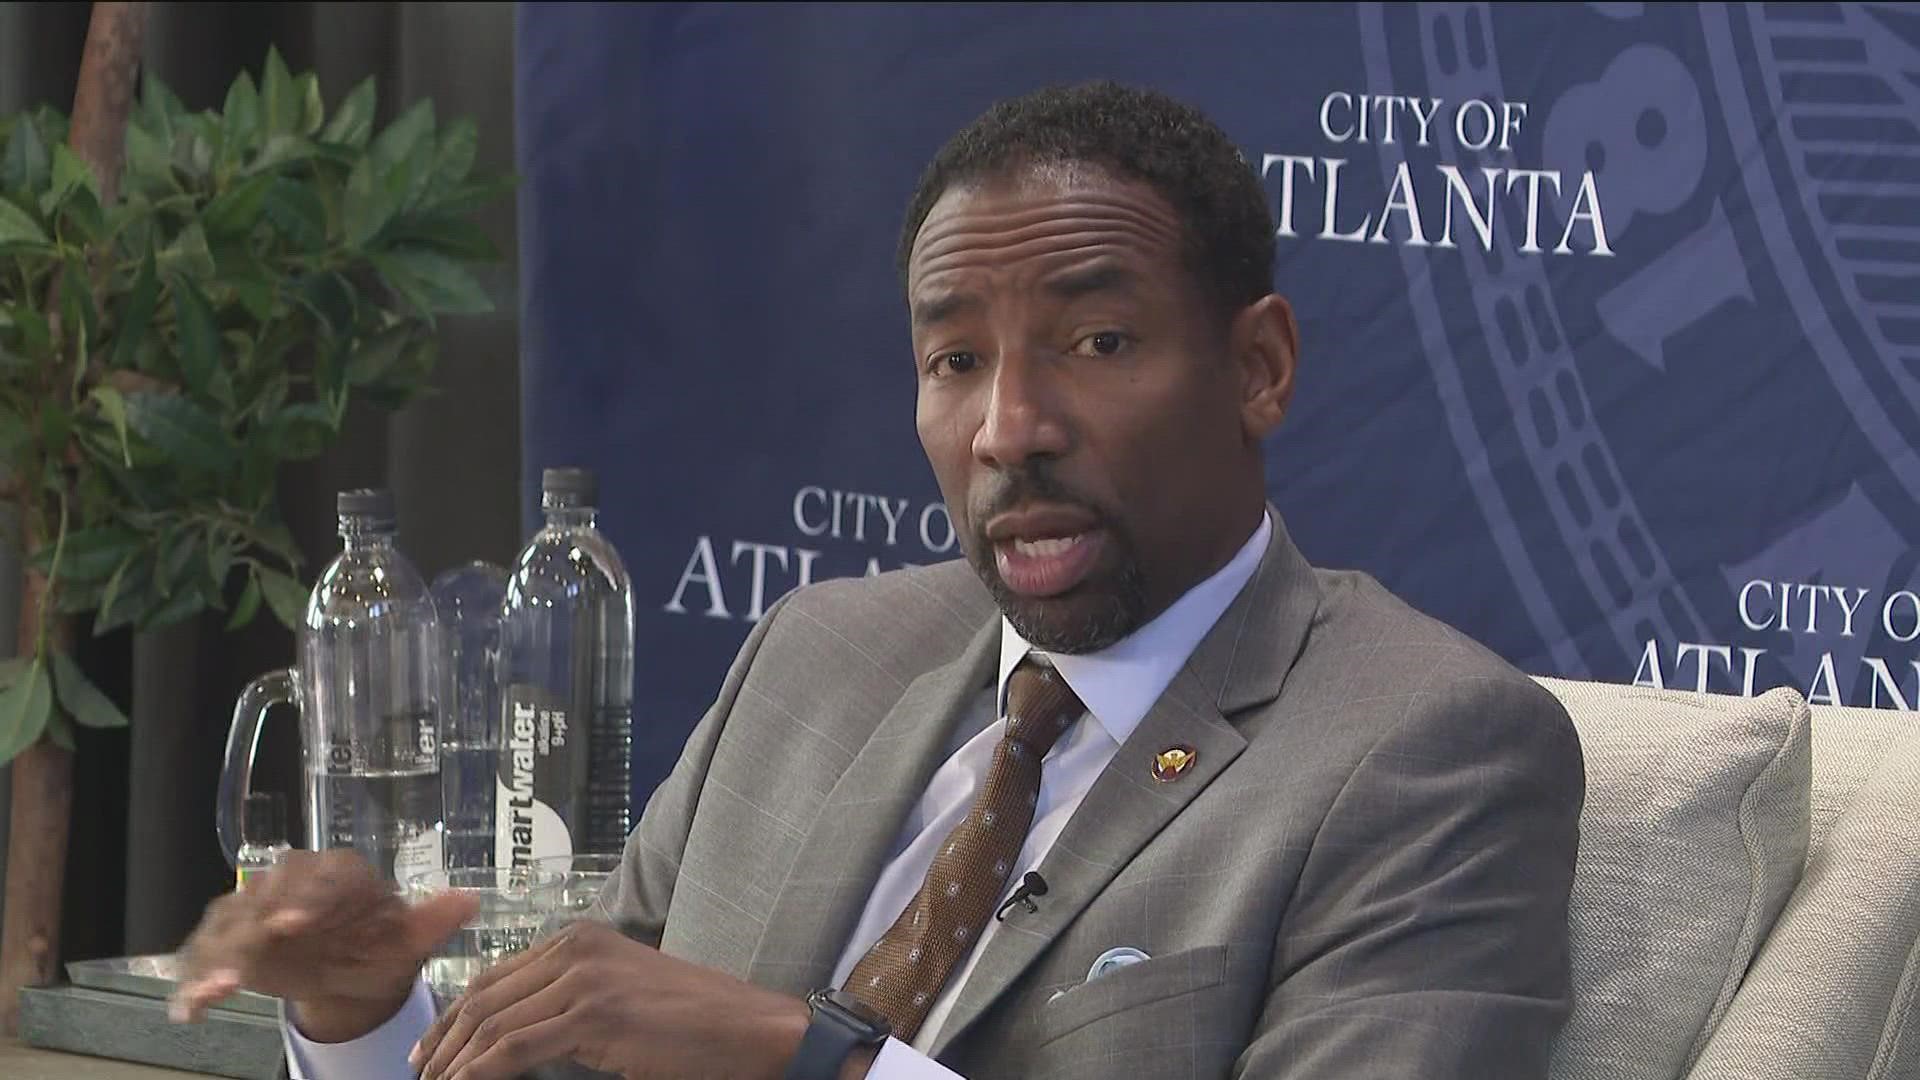 Atlanta mayor says he's focusing on affordable housing, re-opening city hall, and keeping crime low to ensure Buckhead residents don't want to leave.